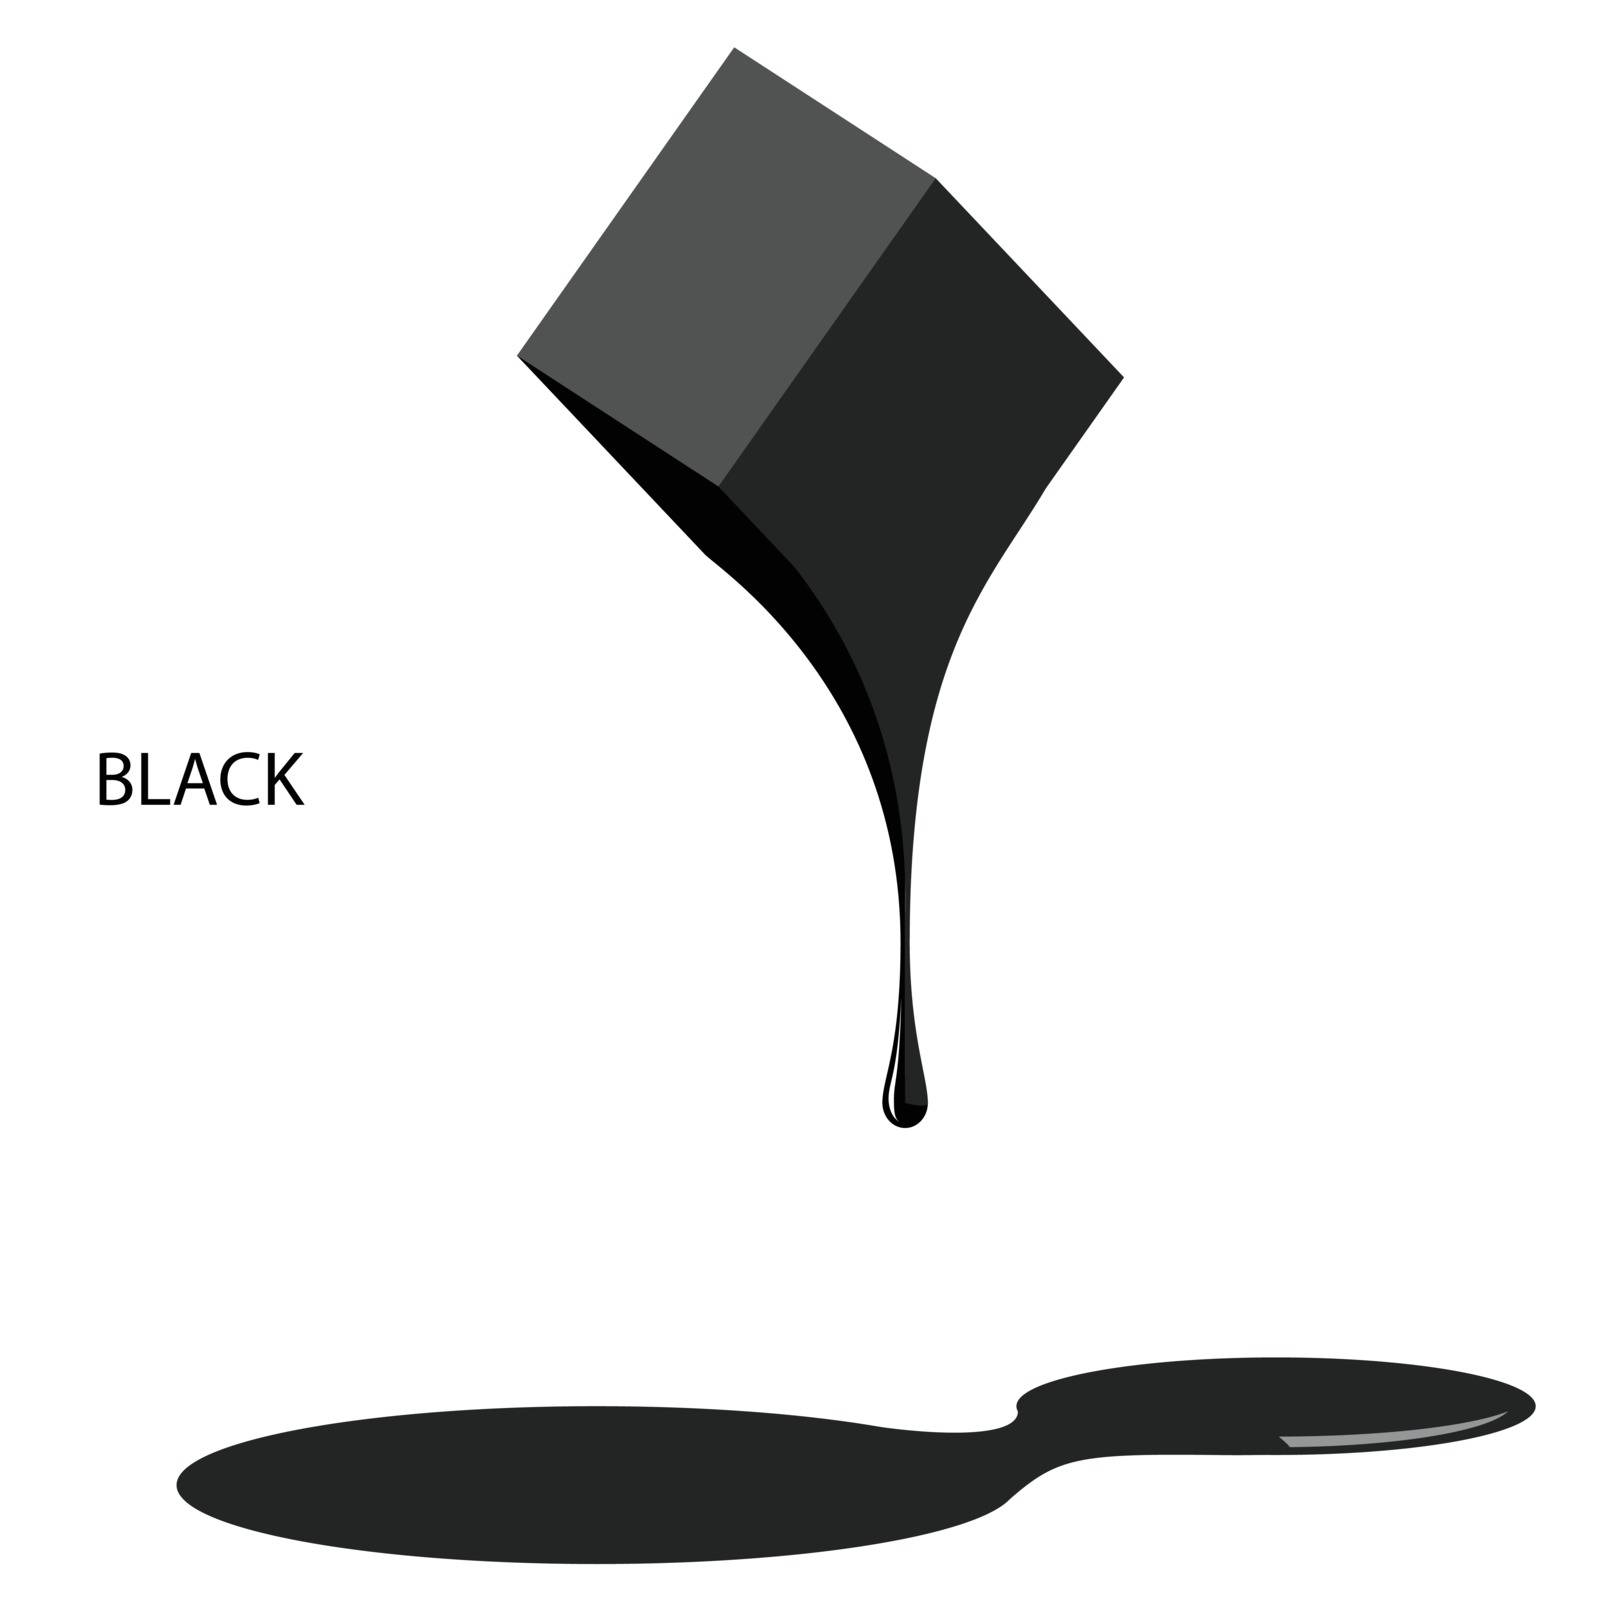 Illustration on which black paint on a white background is represented